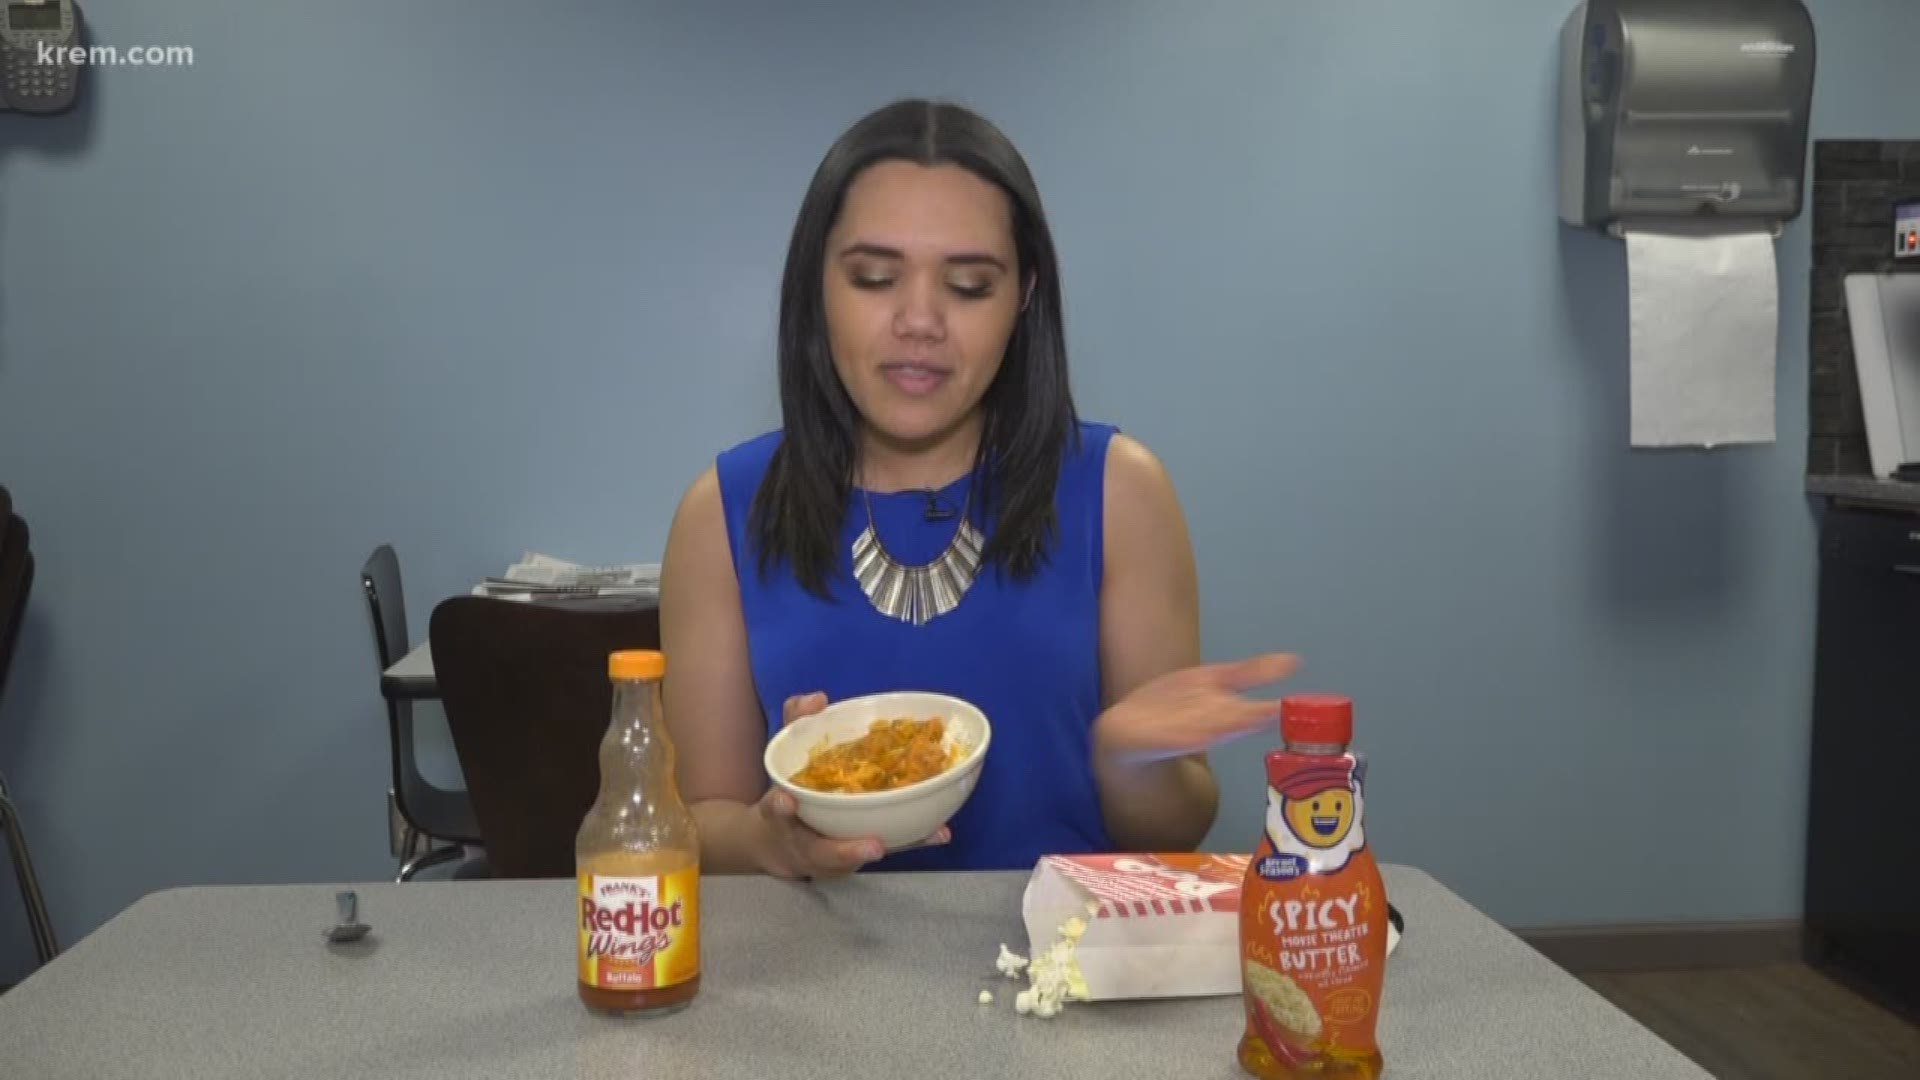 VERIFY: Can eating spicy food cool down your body down on a hot day?